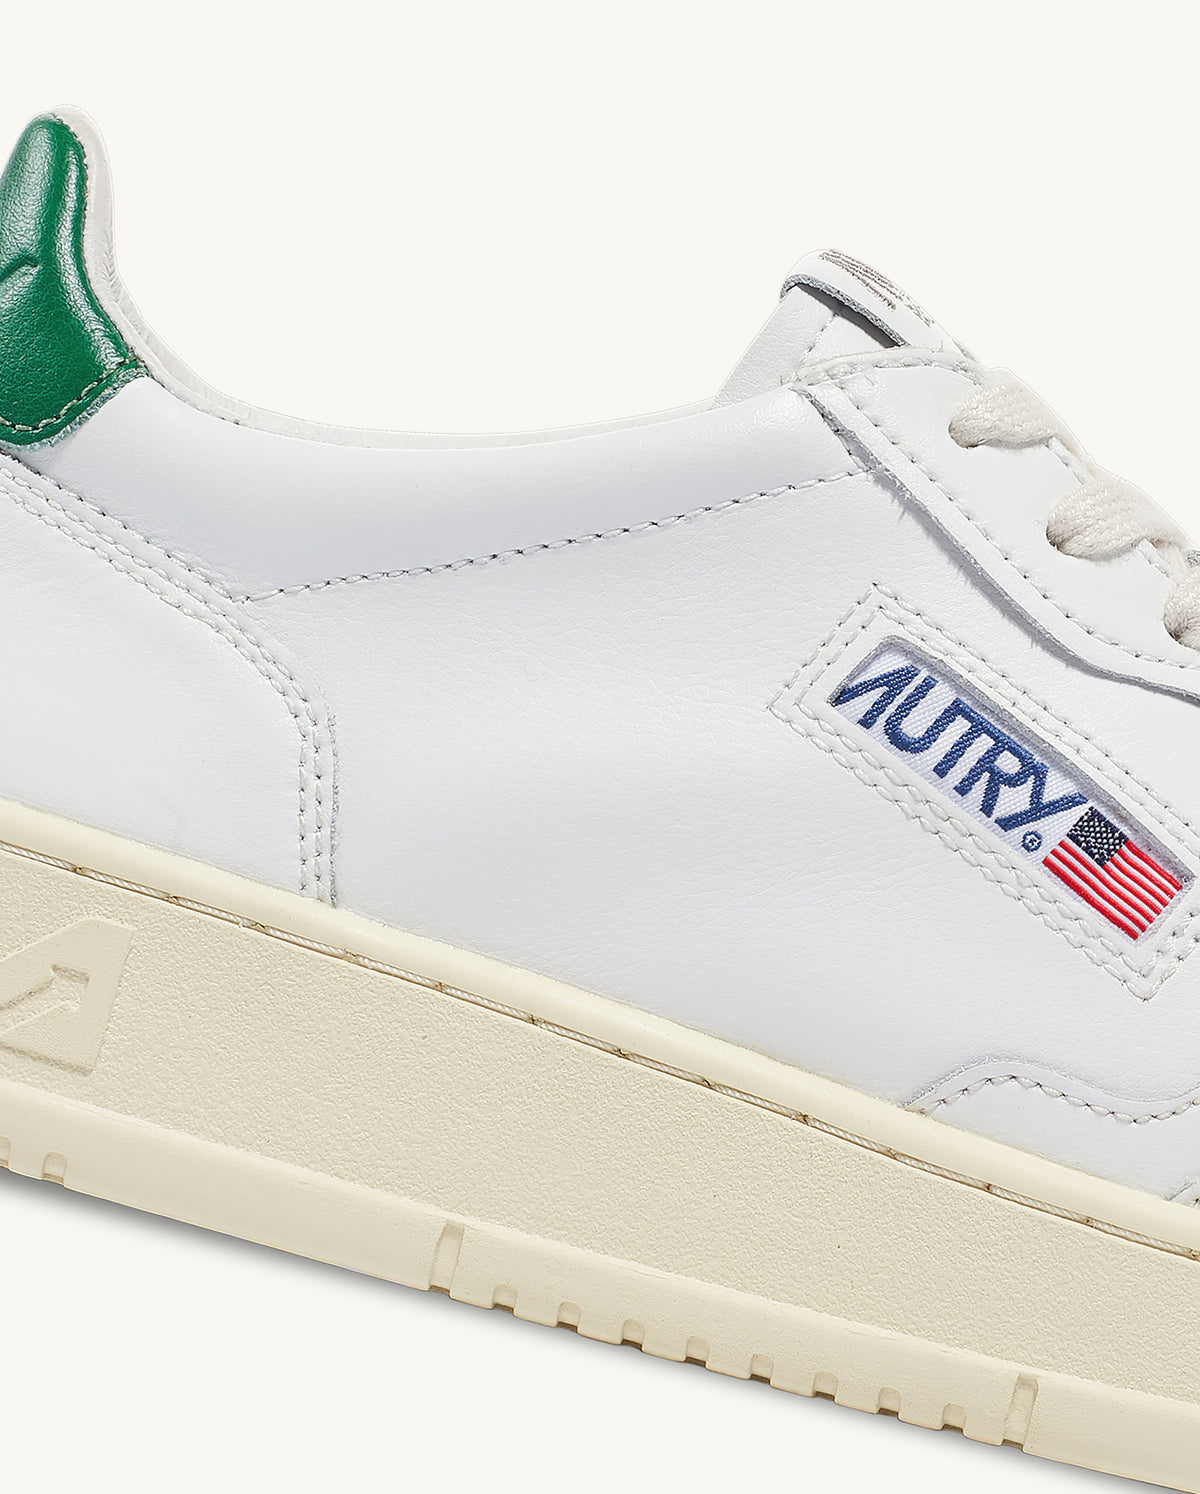 Medalist Low Leather Sneaker - White/Green